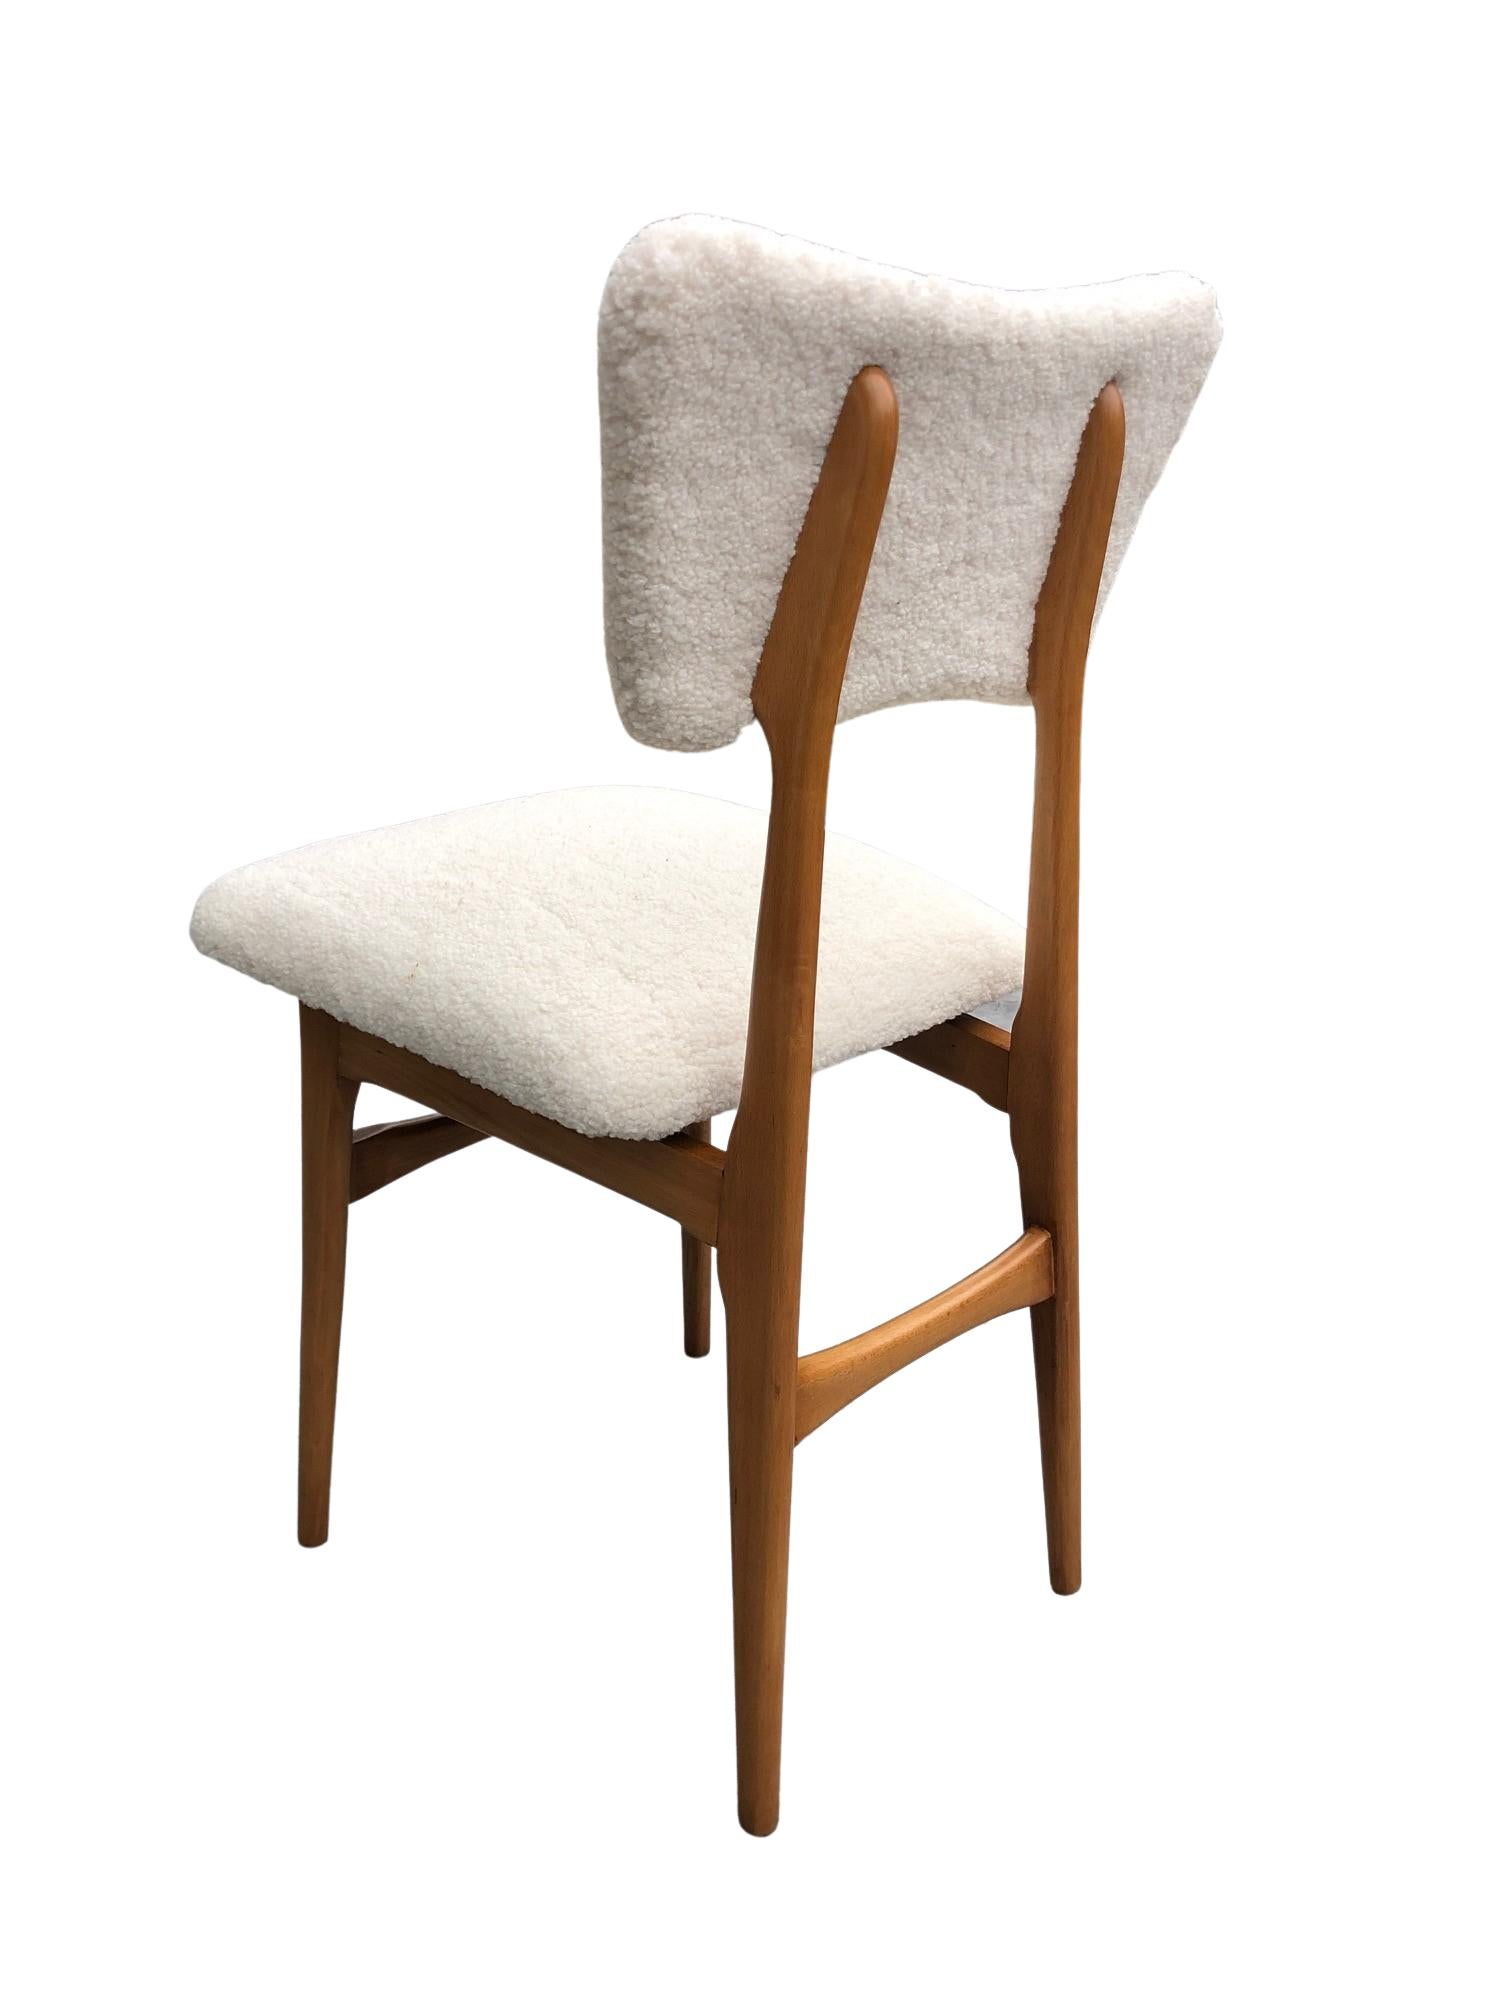 20th Century Midcentury Cream Bouclé and Wood Dining Chairs, Europe, 1960s, Set of Two For Sale